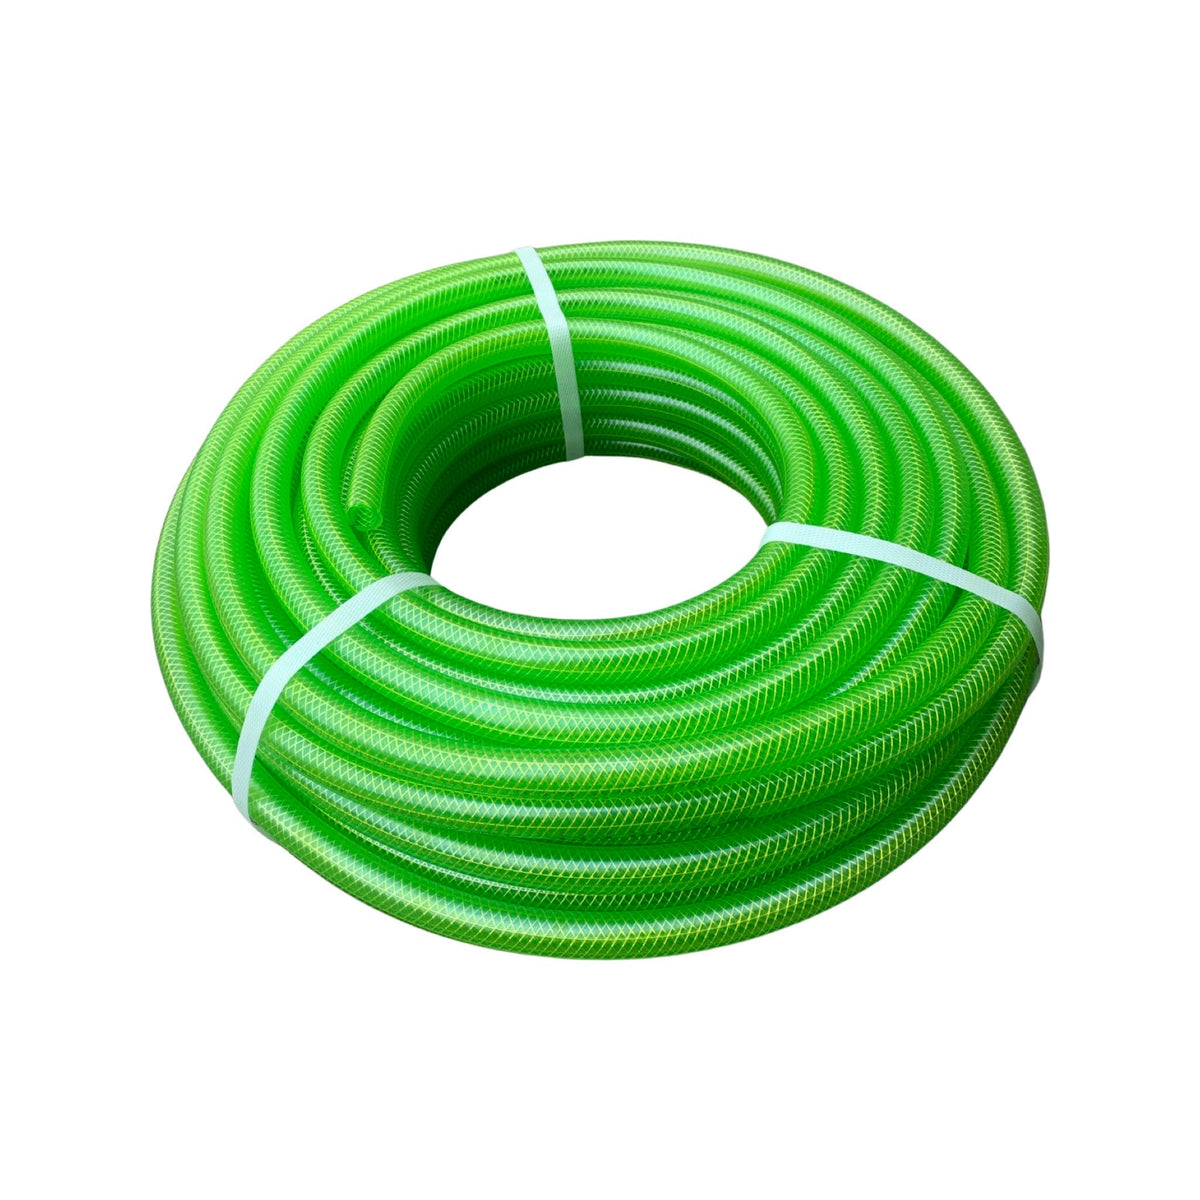 Aquamate Light Weight Garden Hose with 3 piece Plastic Fittings